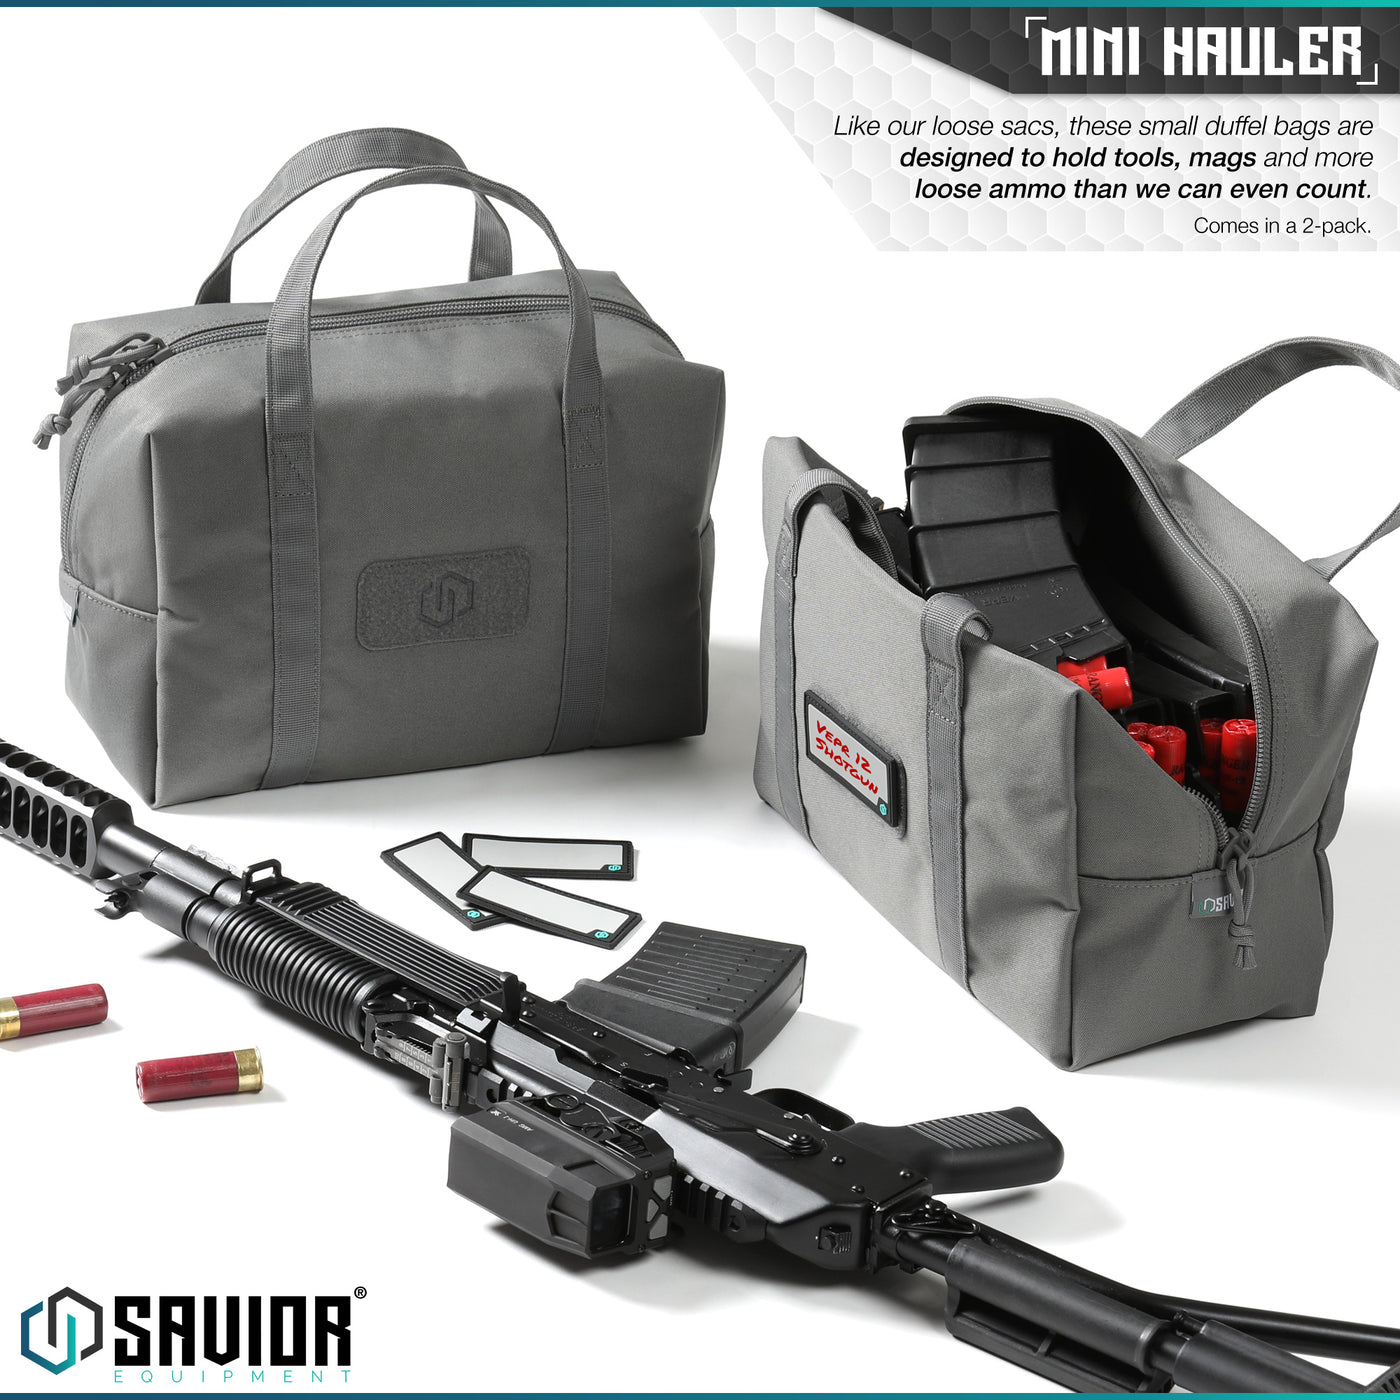 Mini Hauler - Like our loose sacs, these small duffel bags are designed to hold tools, mags and more loose ammo than we can even count. Comes in a 2-pack.